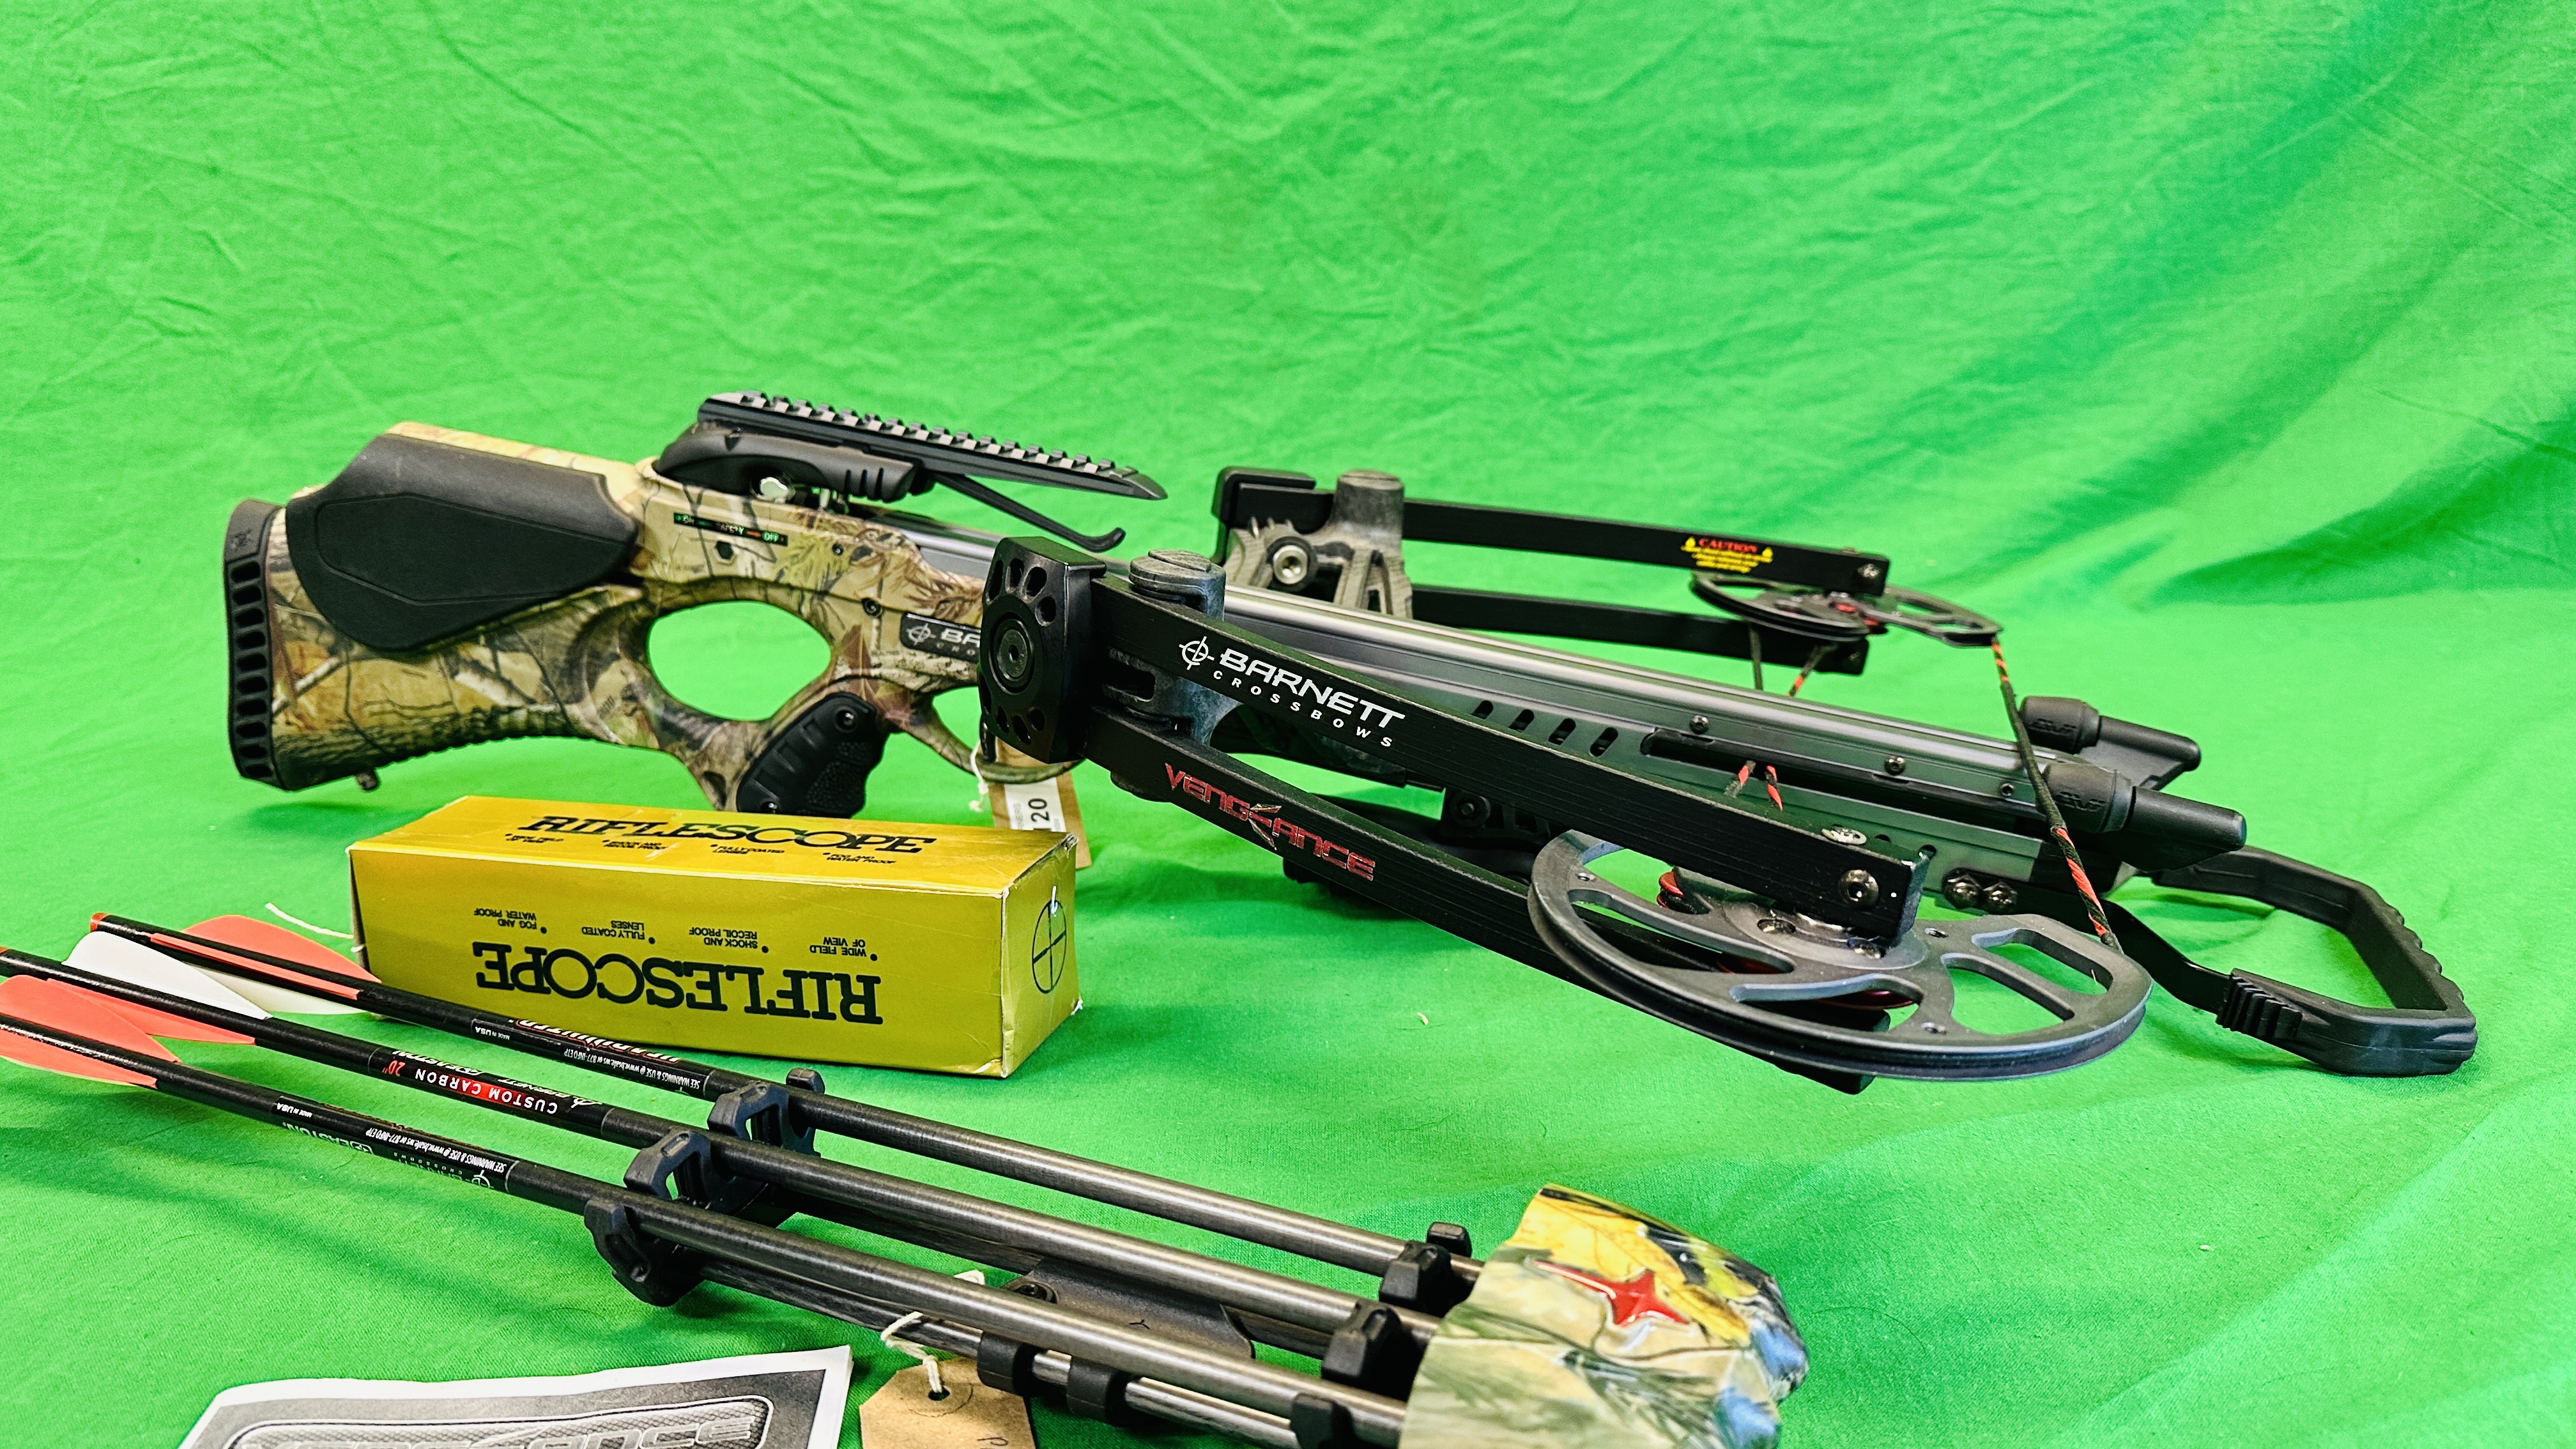 BARNETT "VENGANCE" COMPOUND CROSSBOW COMPLETE WITH THREE CARBON FIBRE CROSSBOW BOLTS, QUIVER, - Image 2 of 35